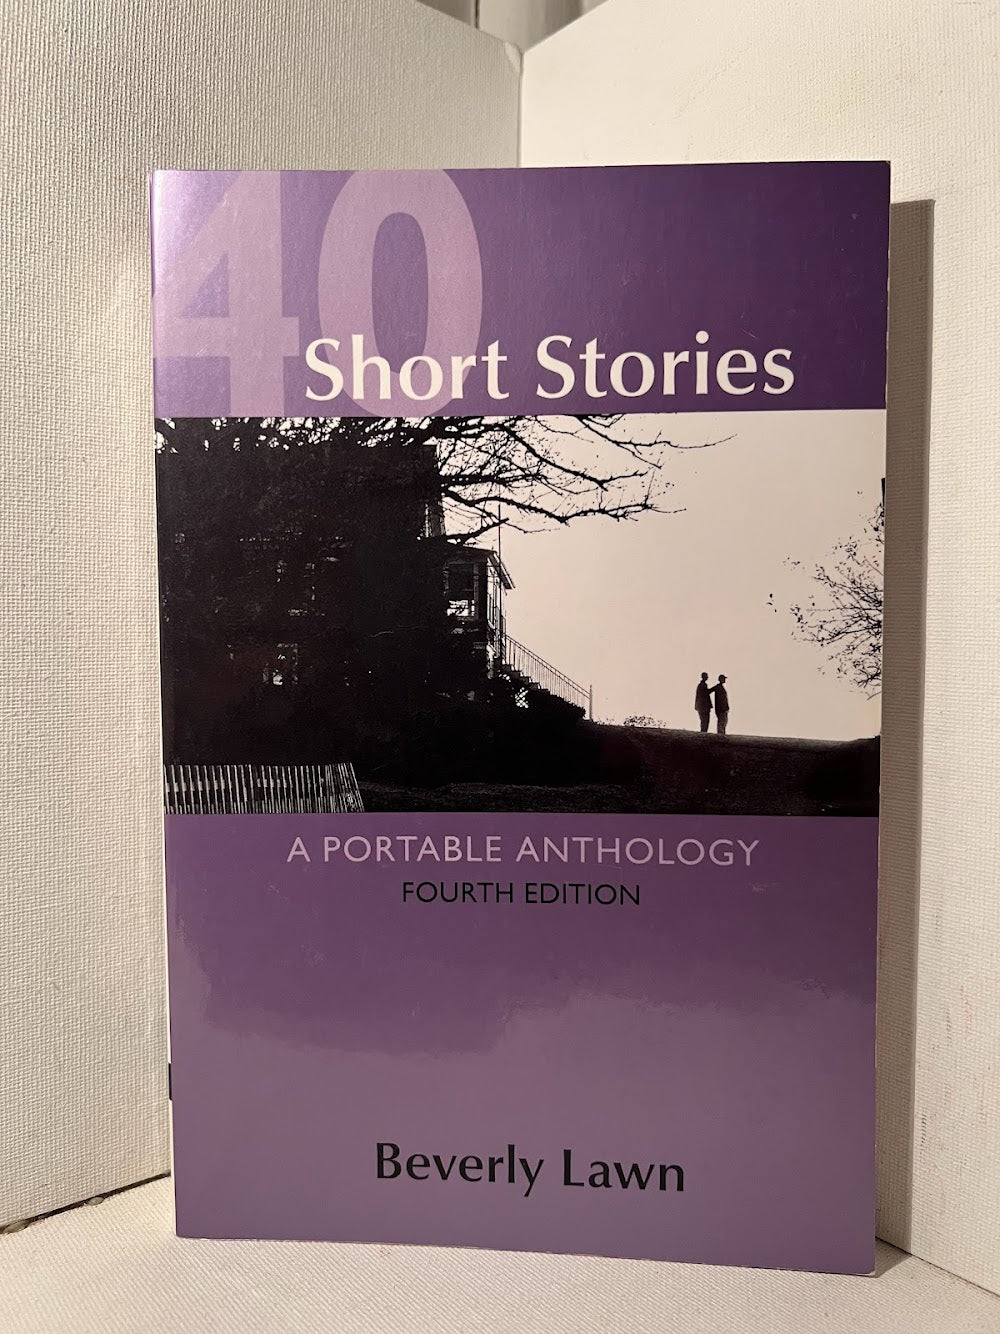 40 Short Stories: A Portable Anthology edited by Beverly Lawn